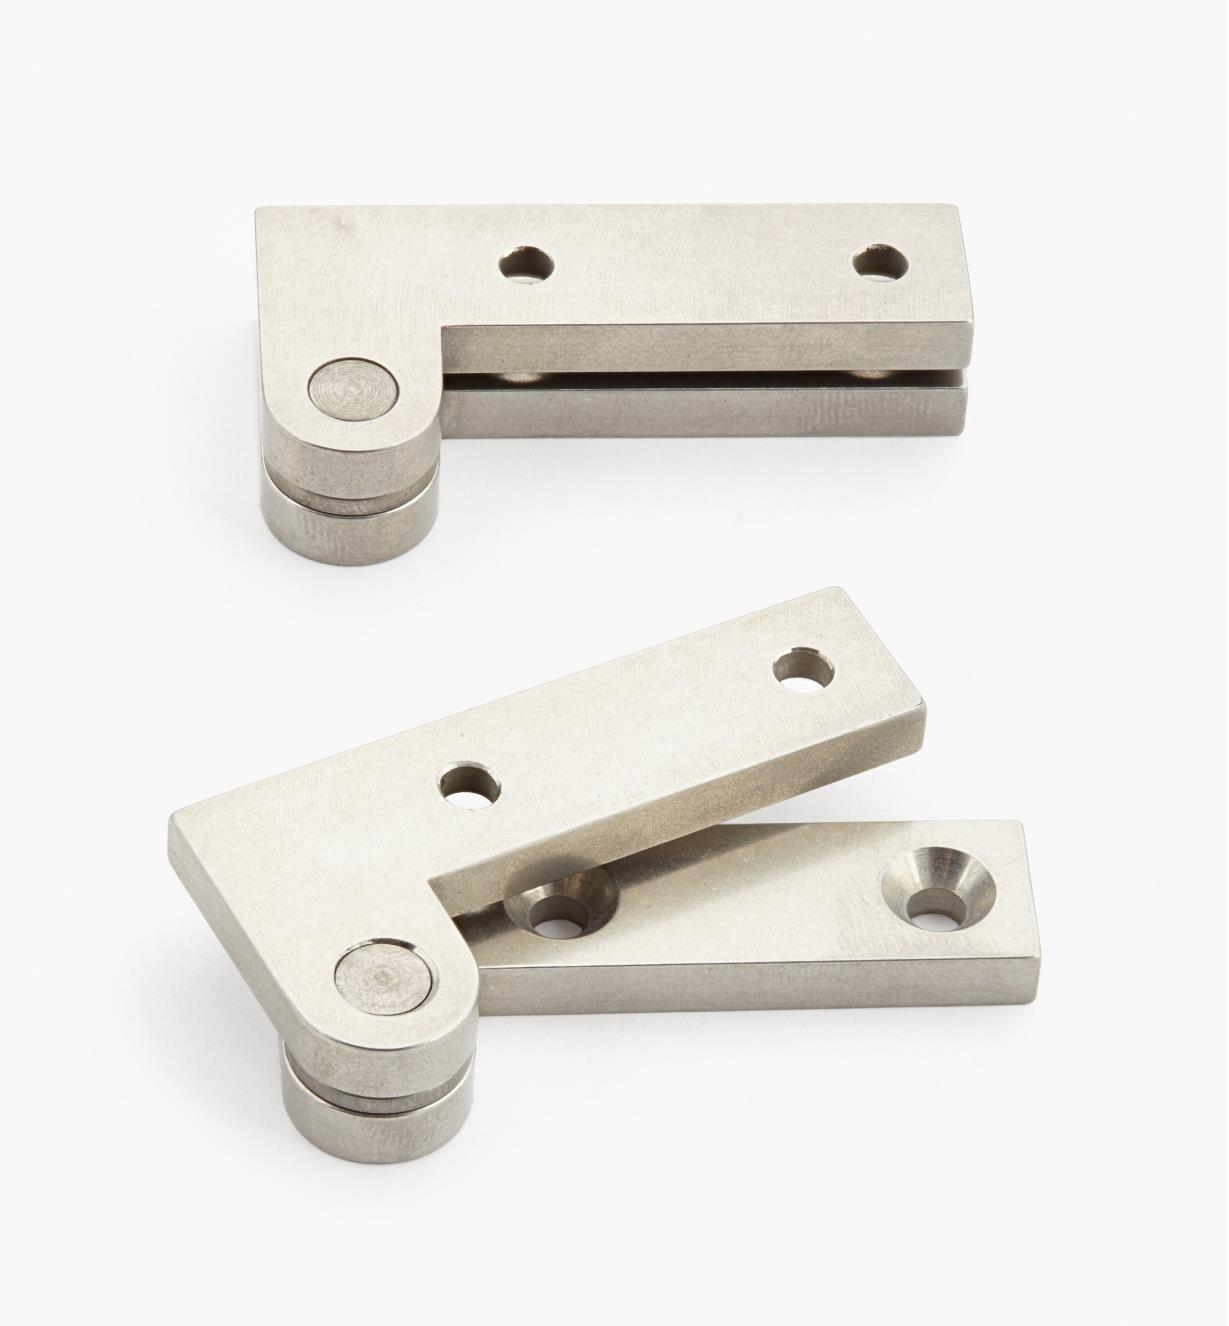 05H0158 - 1" x 2" x 3/16", Stainless Steel Double-Offset Knife Hinges, pair